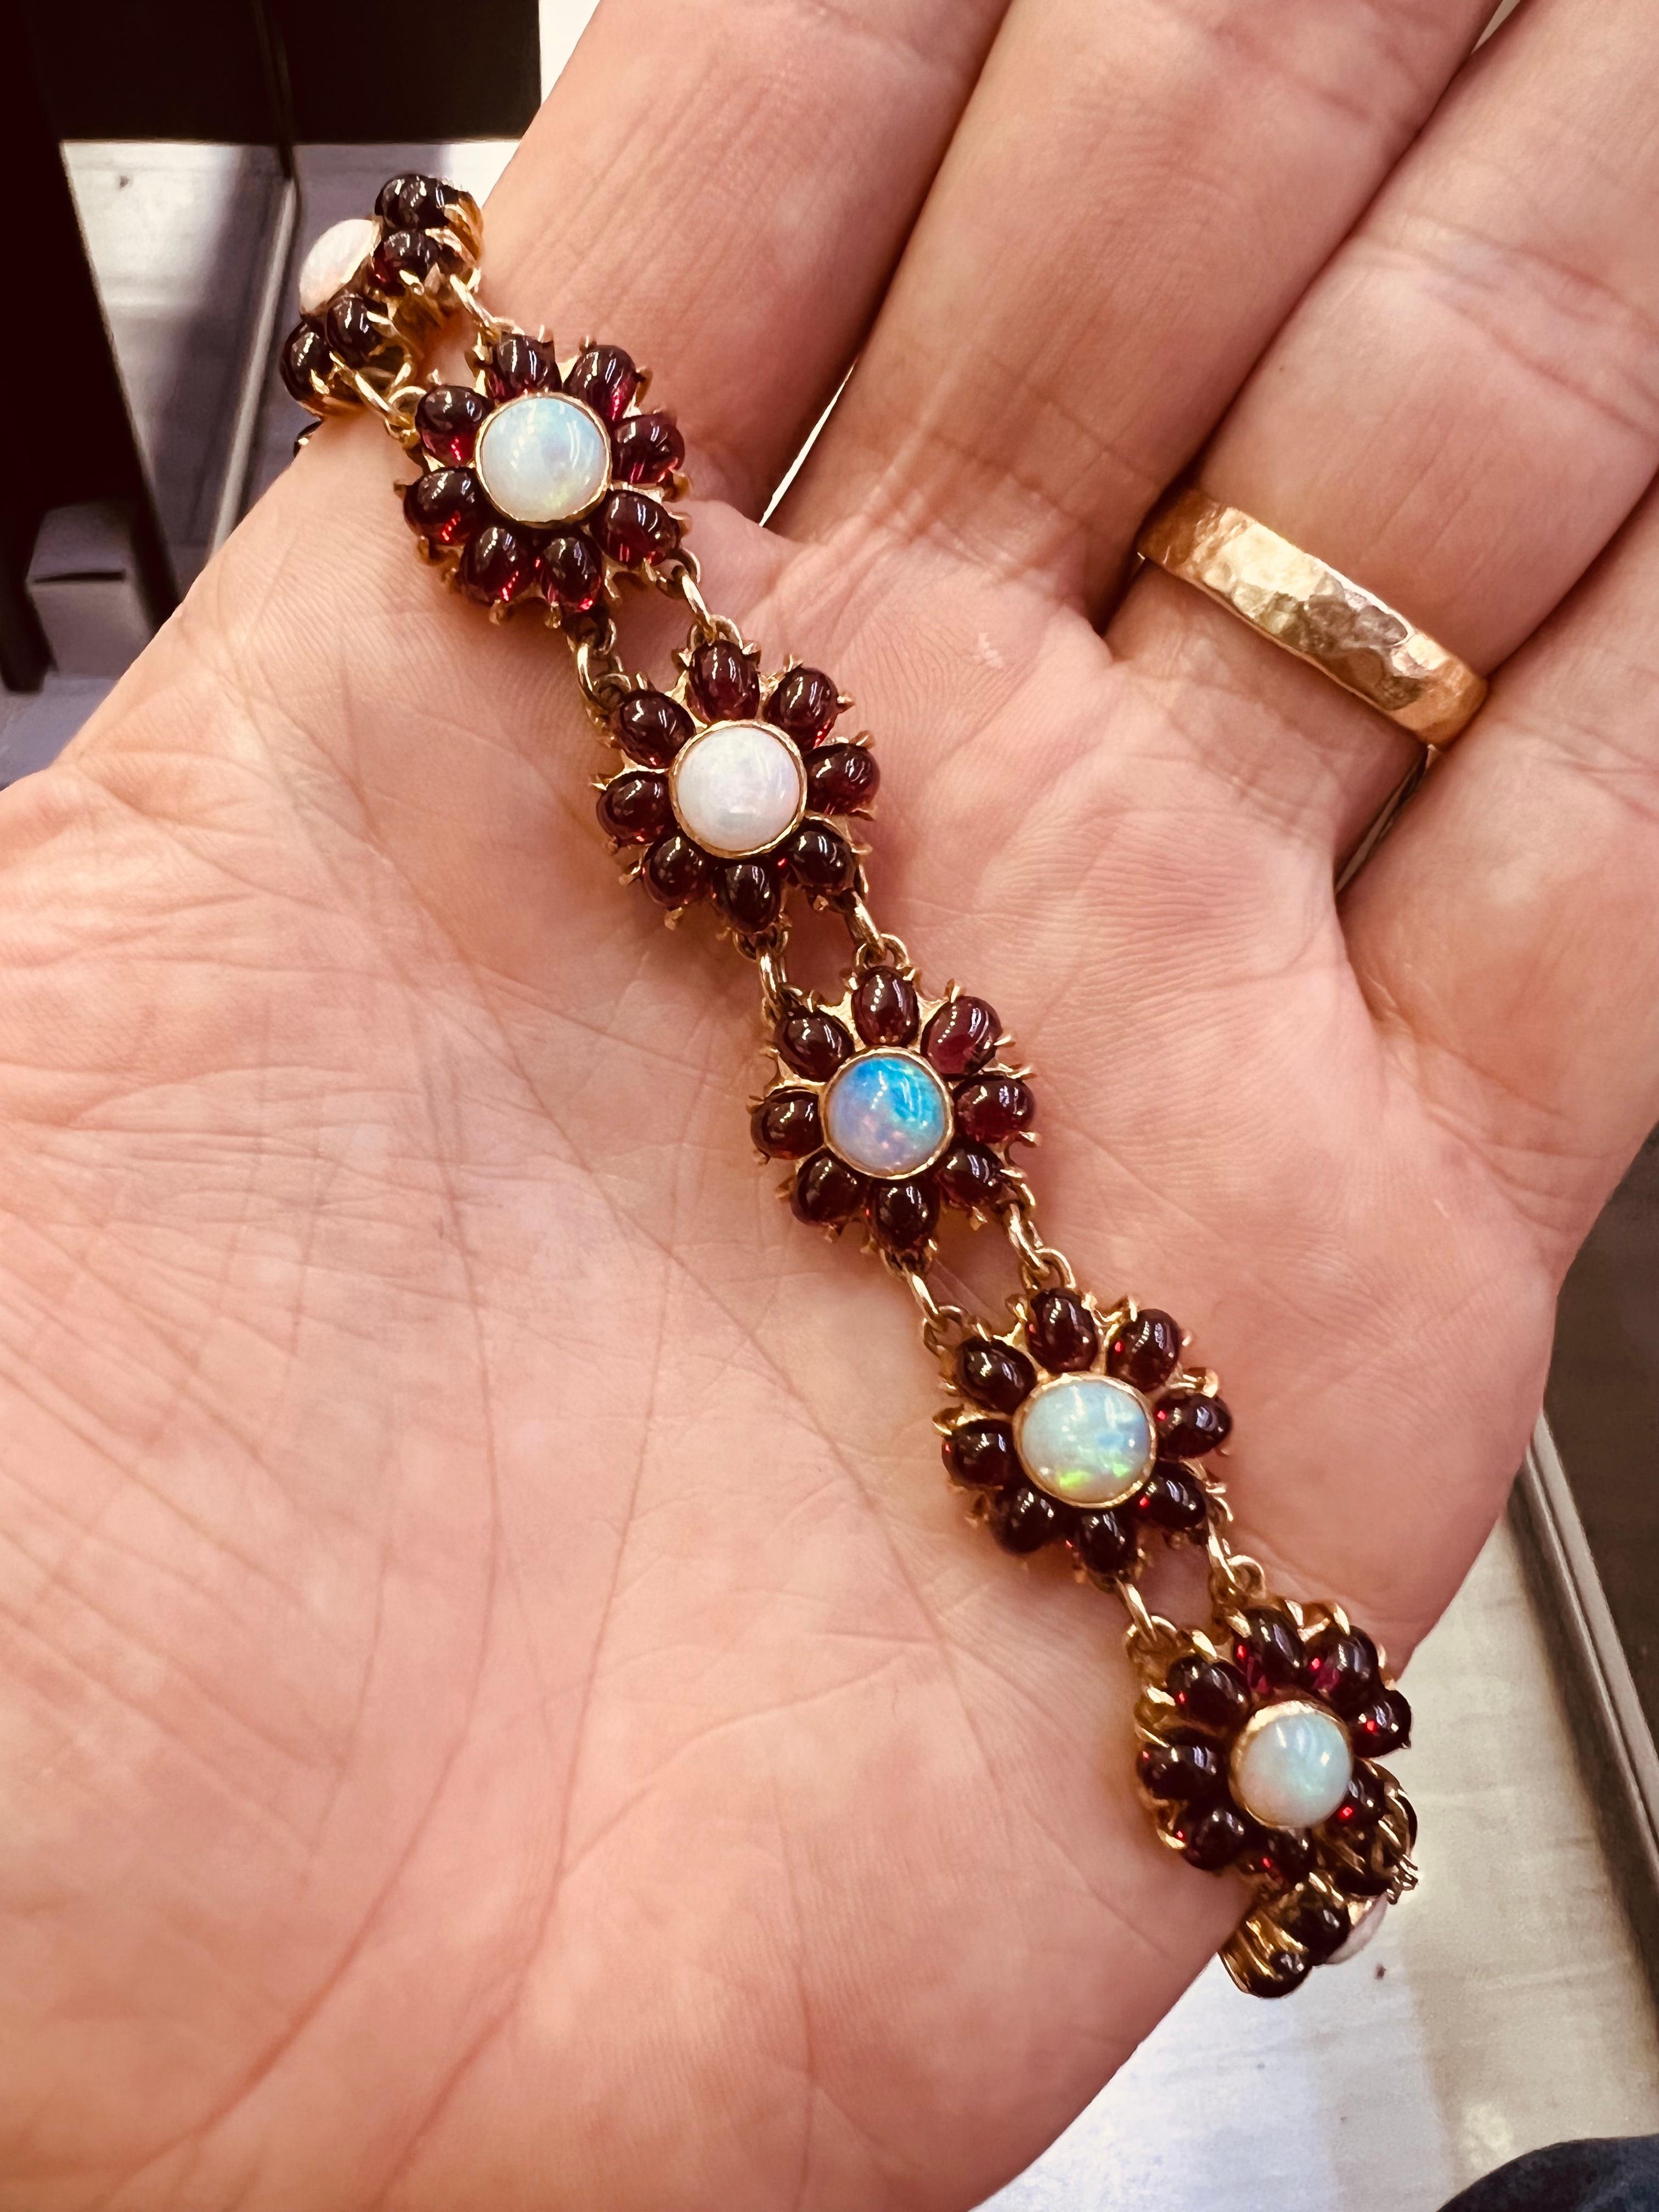 One of a kind details seen in this vintage creation. This handmade bracelet is crafted in 14k yellow gold and set with garnet and opal gemstones throughout. The bracelet is crafted to resemble flowers, delicately set to be worn as wearable art work!